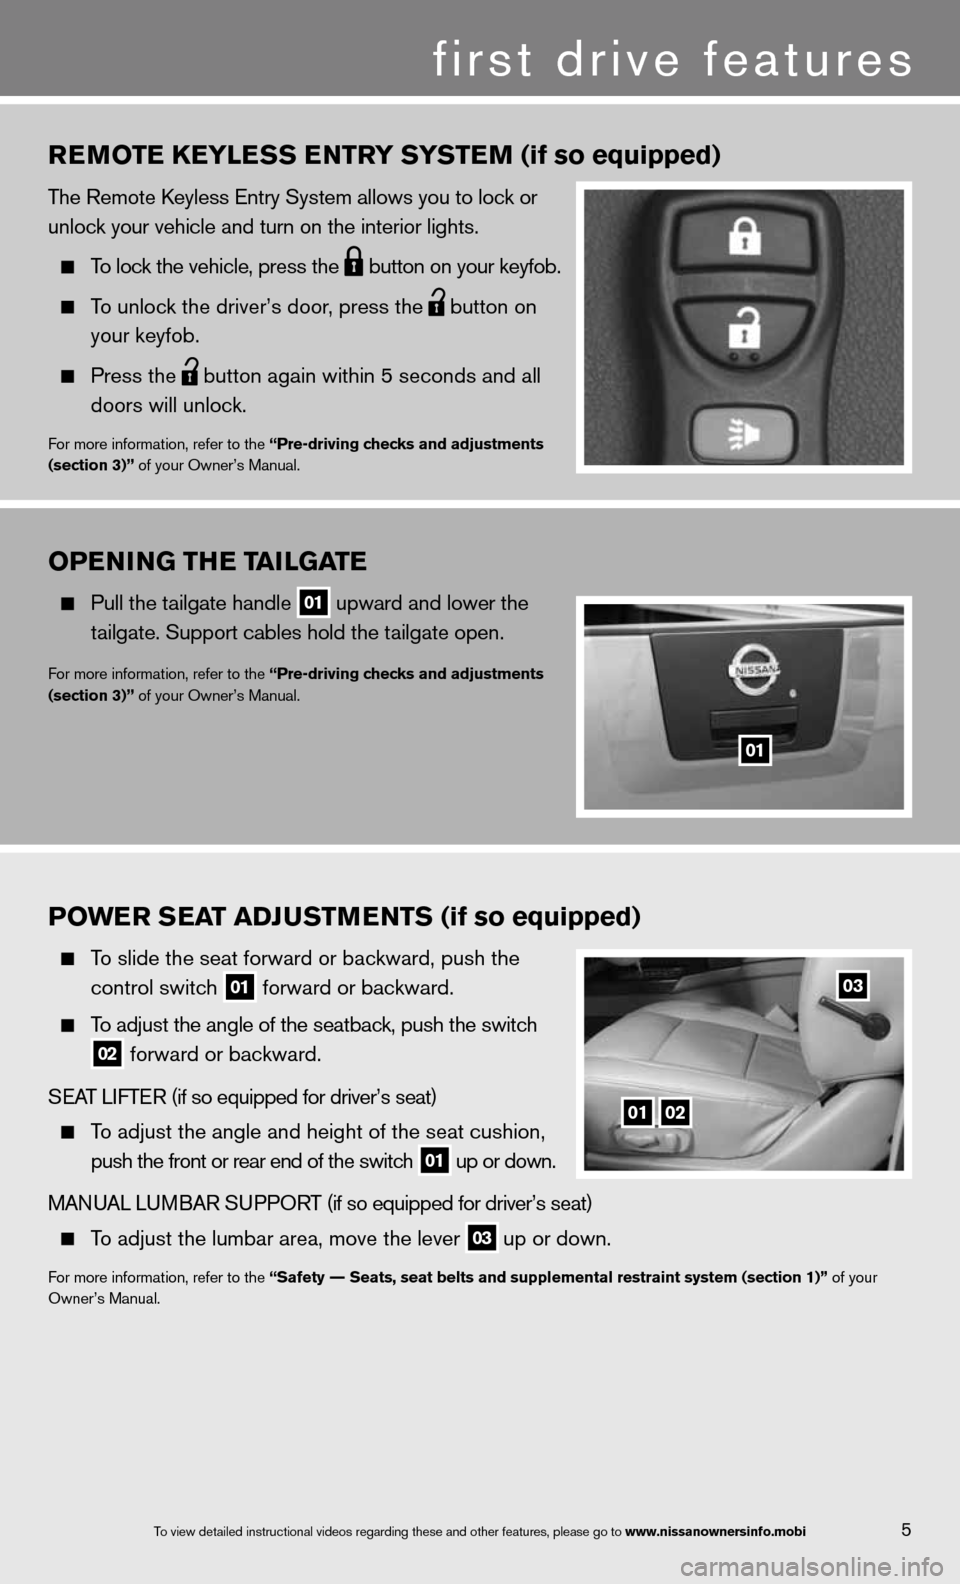 NISSAN TITAN 2013 1.G Quick Reference Guide OPENING ThE TAILGATE
  Pull the tailgate handle
 01 upward and lower the 
    tailgate. Support cables hold the tailgate open.
for more information, refer to the “Pre-driving checks and adjustments 